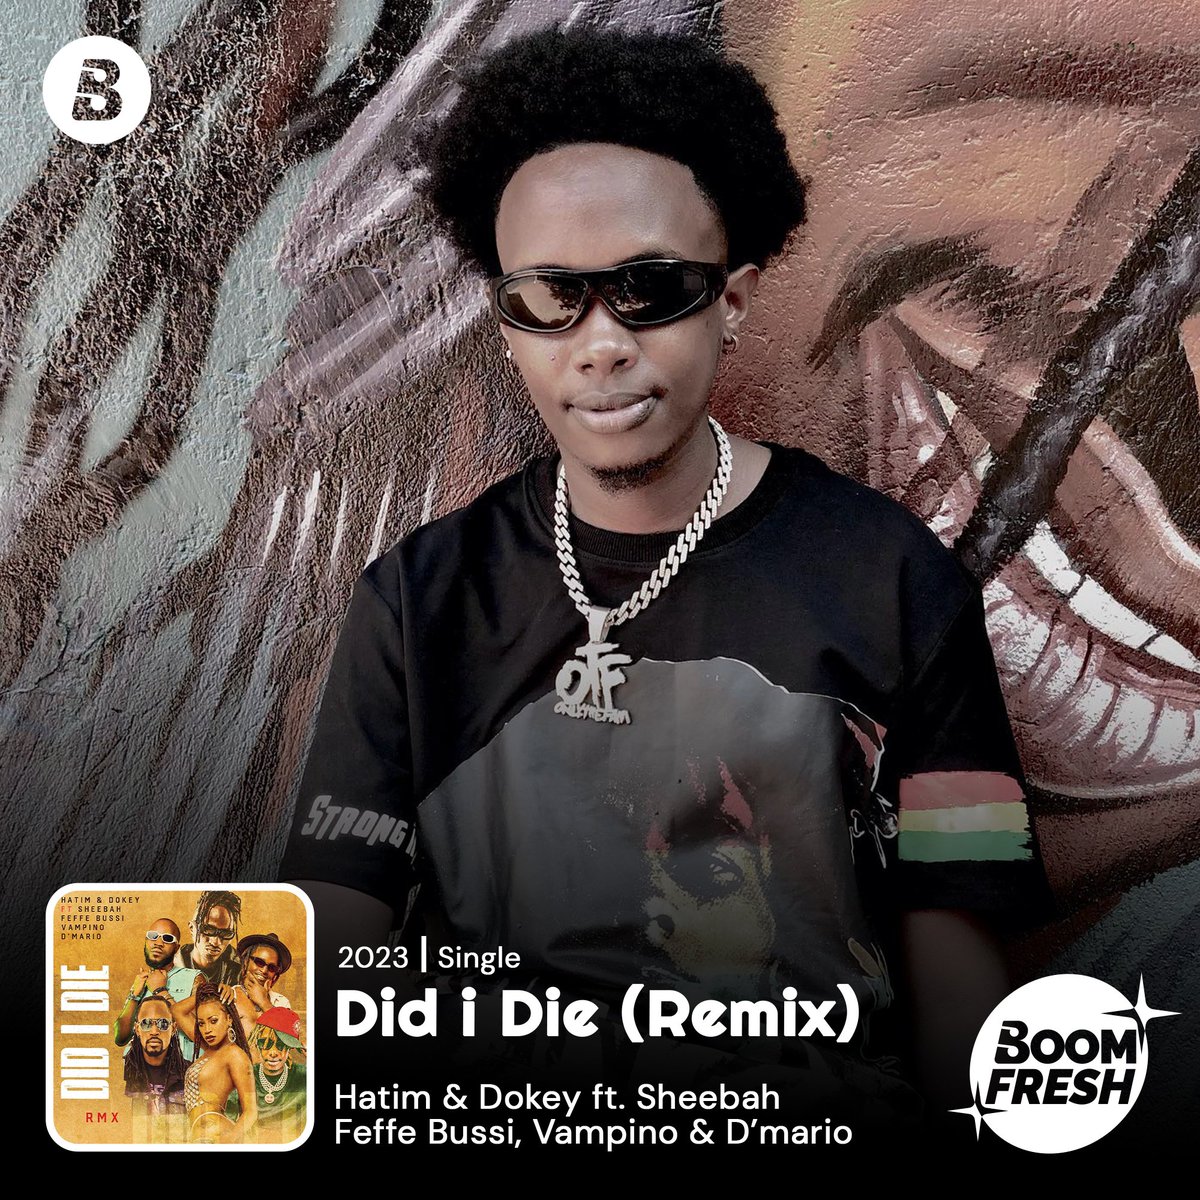 🚨BOOM FRESH🚨 The tune we've all been waiting for, here's #DidIDie the remix by @hatimanddokey featuring @Ksheebah1 ,@FeffebussiMusic @Vampinoxrated and D'Mario Check it out on #boomplay